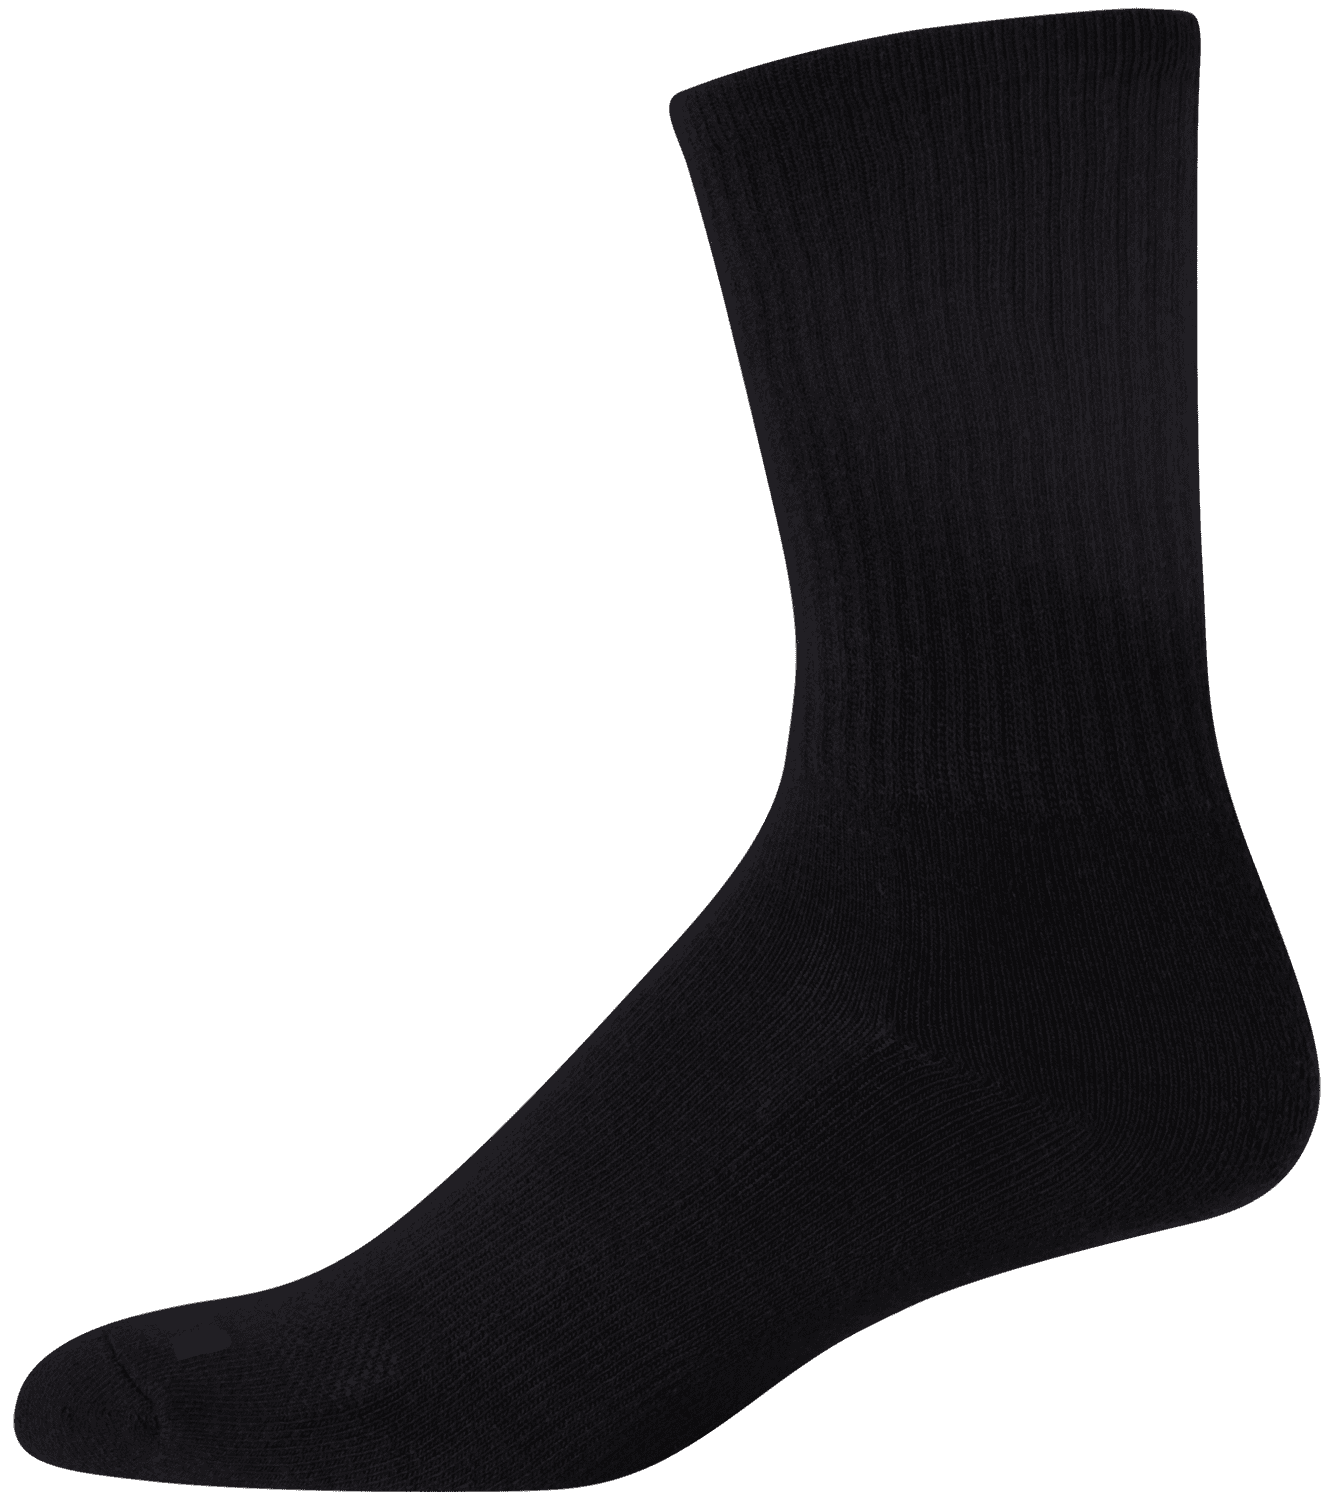 AND1 Men's Cushion Crew Sock, 12 Pack 